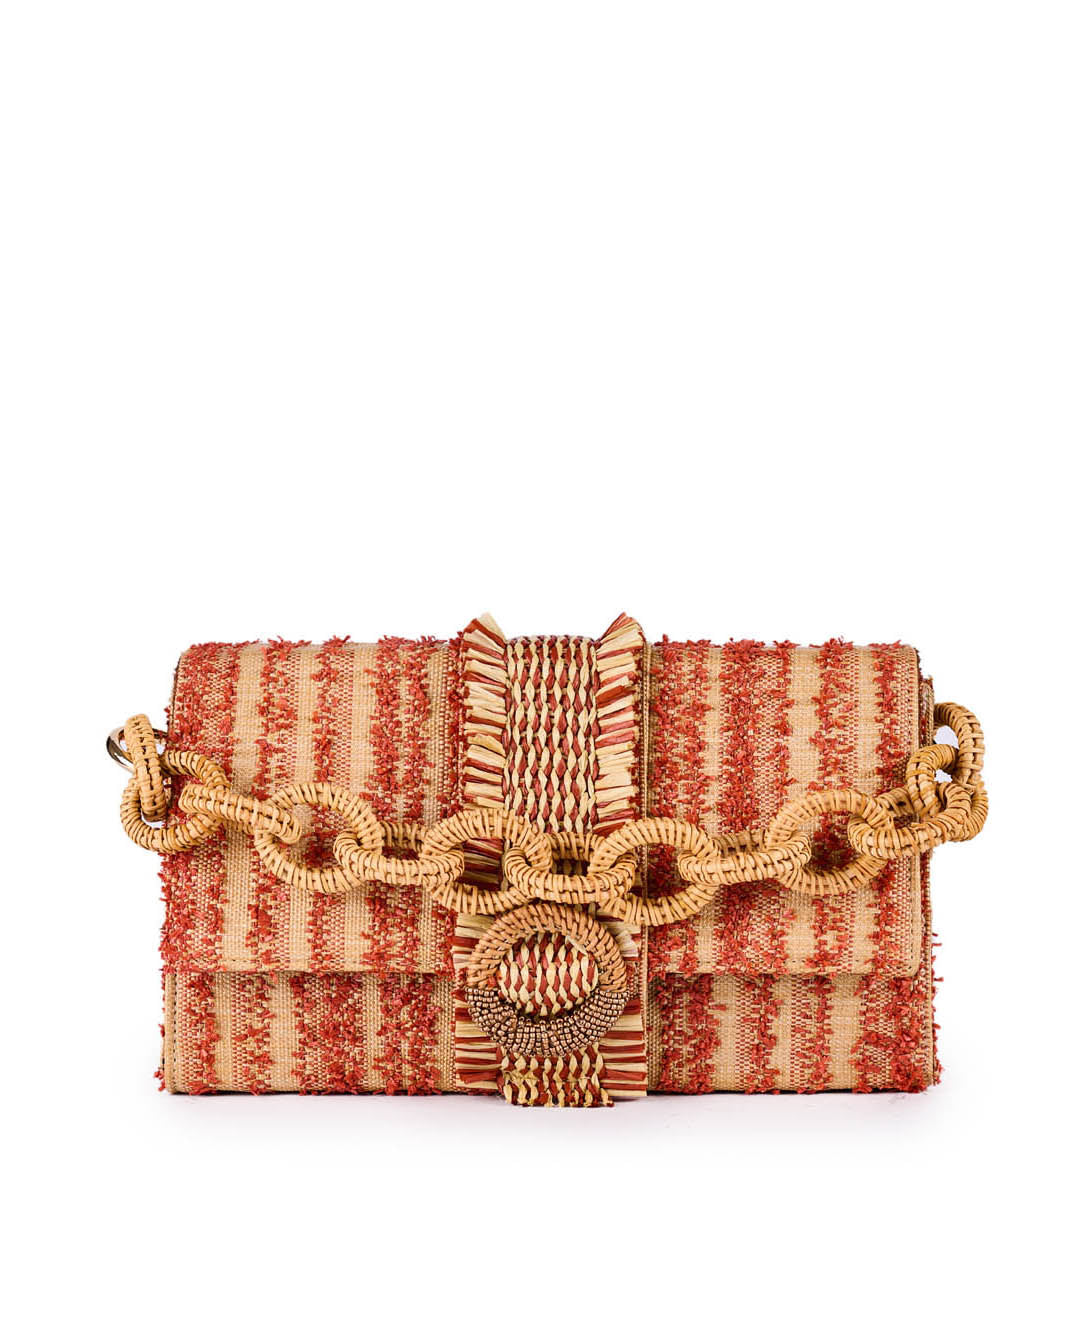 Red and beige woven straw clutch bag with decorative chain and buckle